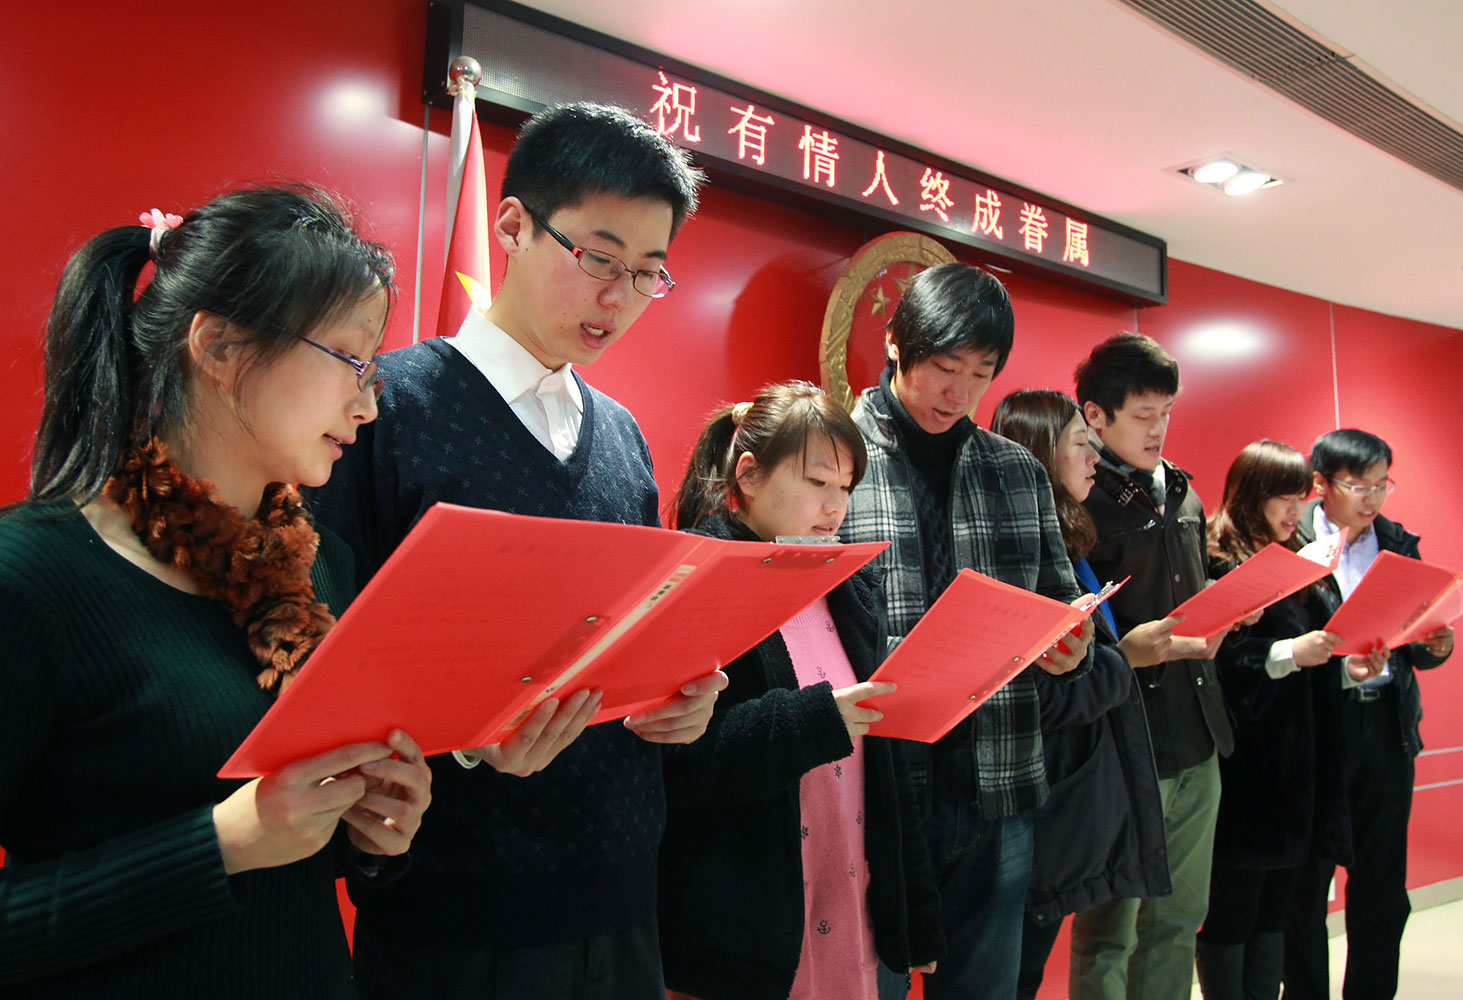 image: Couples read marriage vows in Shanghai.